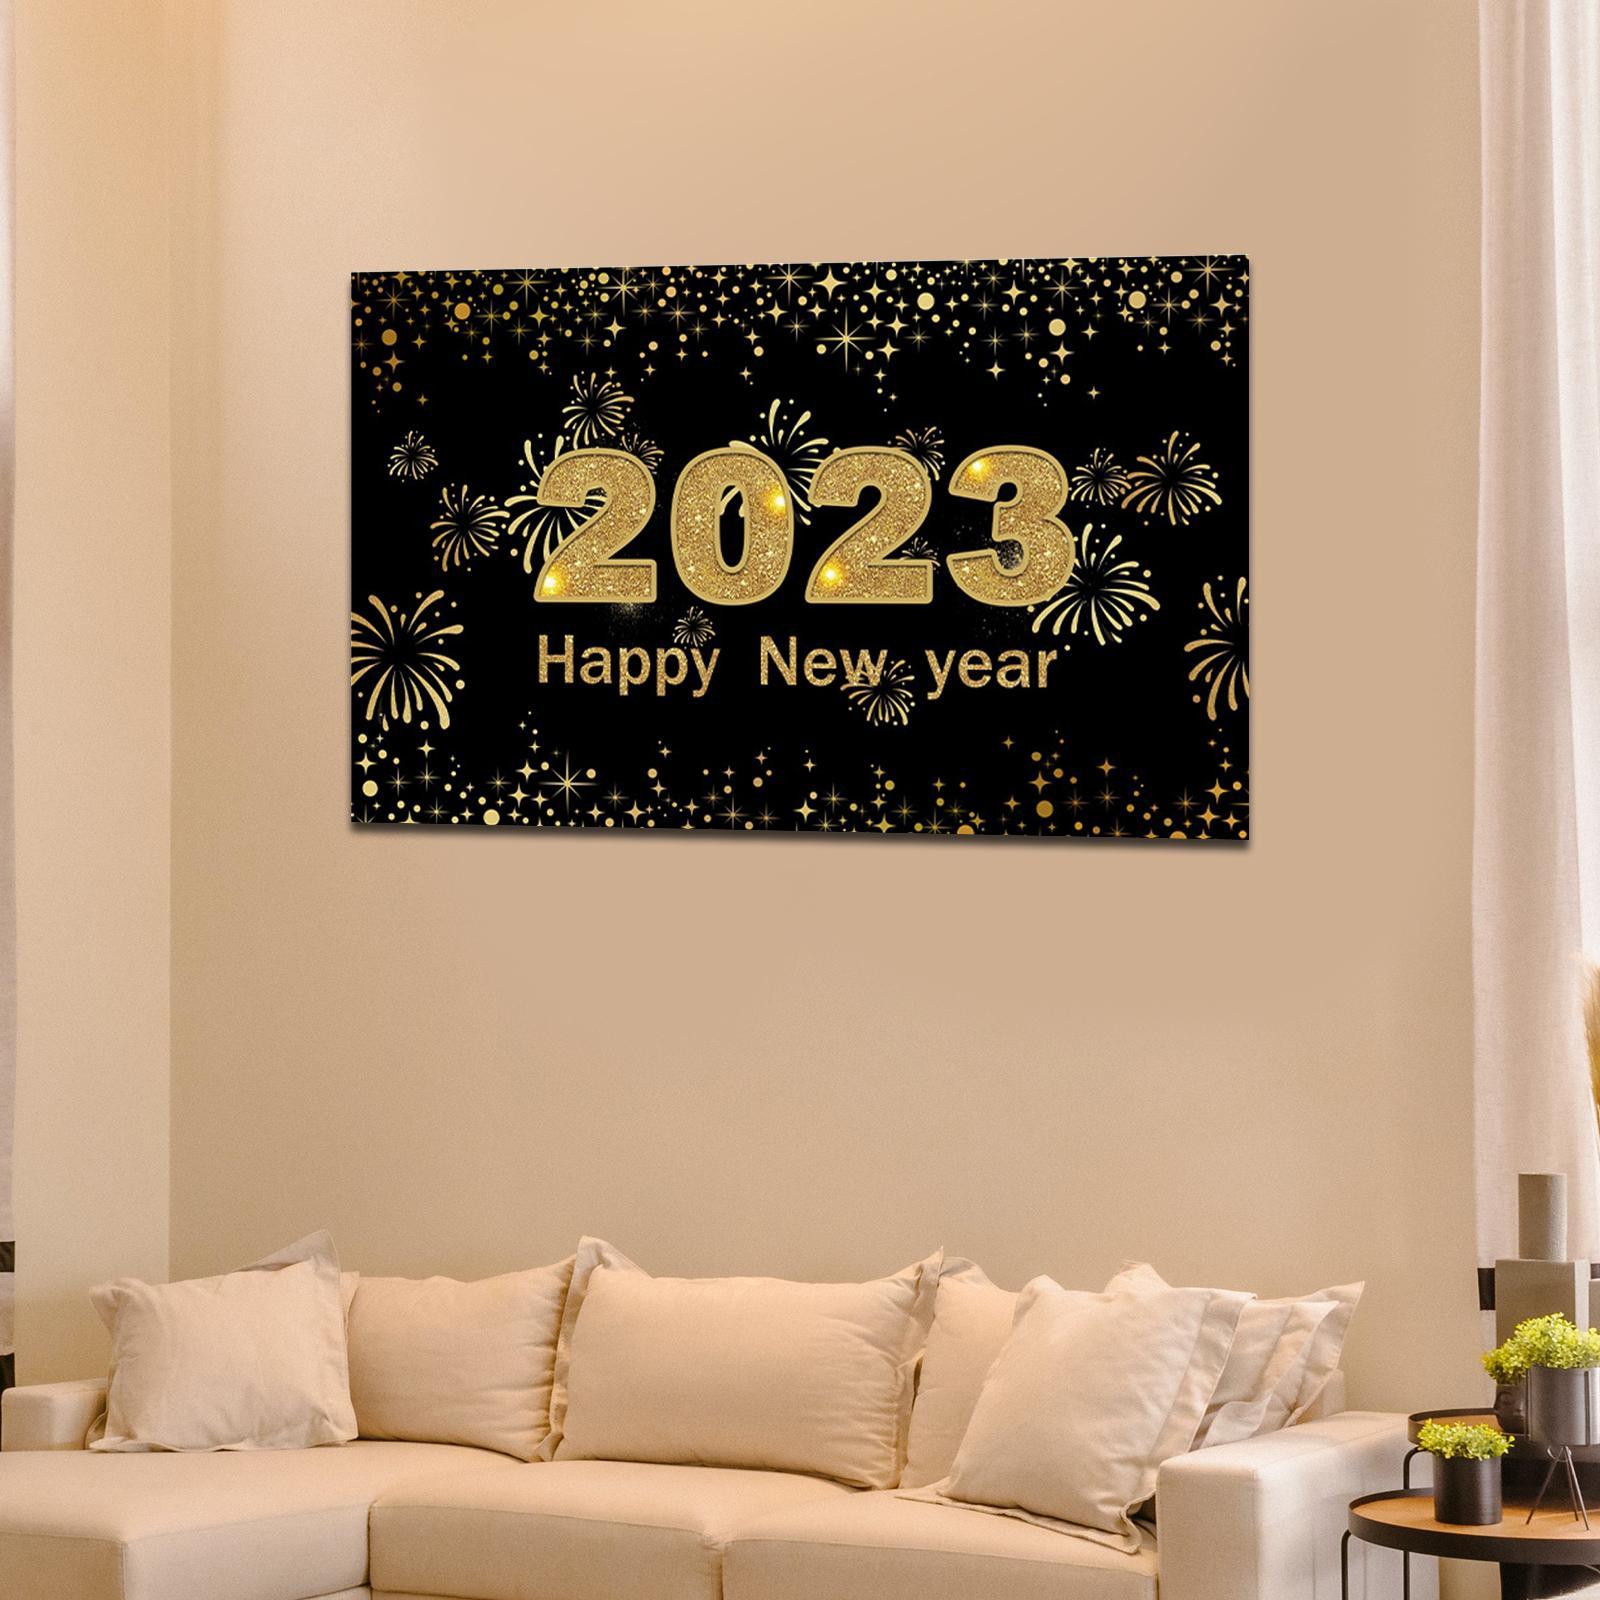 Happy New Year  2023 Backdrop Black Aureate Decorative Photography Lawn  Poster for Christmas Living Room Kitchen Yard Garden